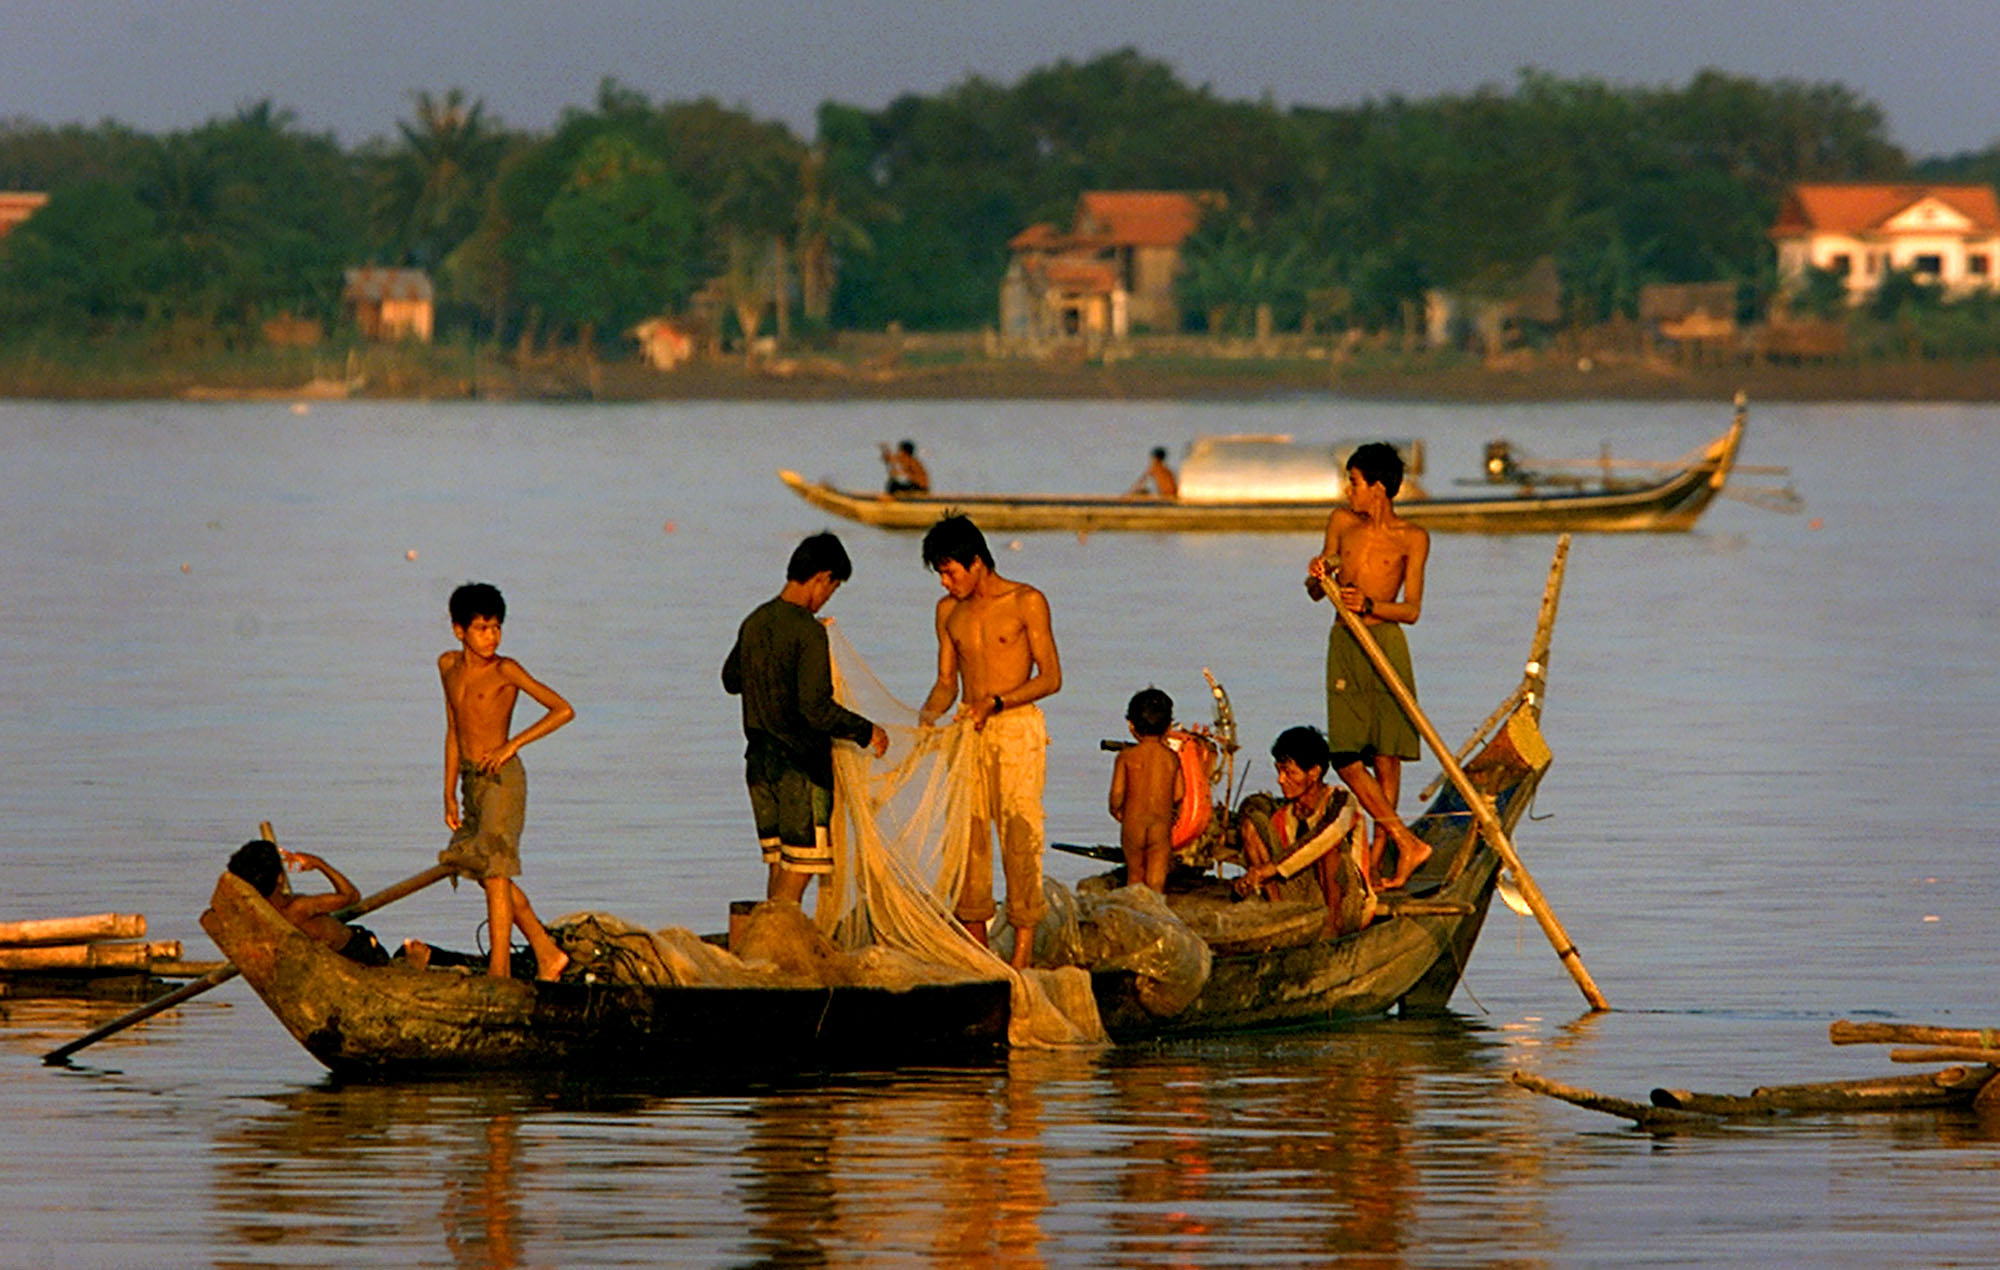 Cambodian boys fish from their small boat next to the community where they live on the Mekong River in Phnom Penh, Cambodia, Oct. 25, 2002. China's moves to dam and blast the Mekong River are arousing fears and protests that one of the world's last great untamed waterways will prove unable to sustain the millions who have depended on its bounty for centuries. (AP Photo/Andy Eames)